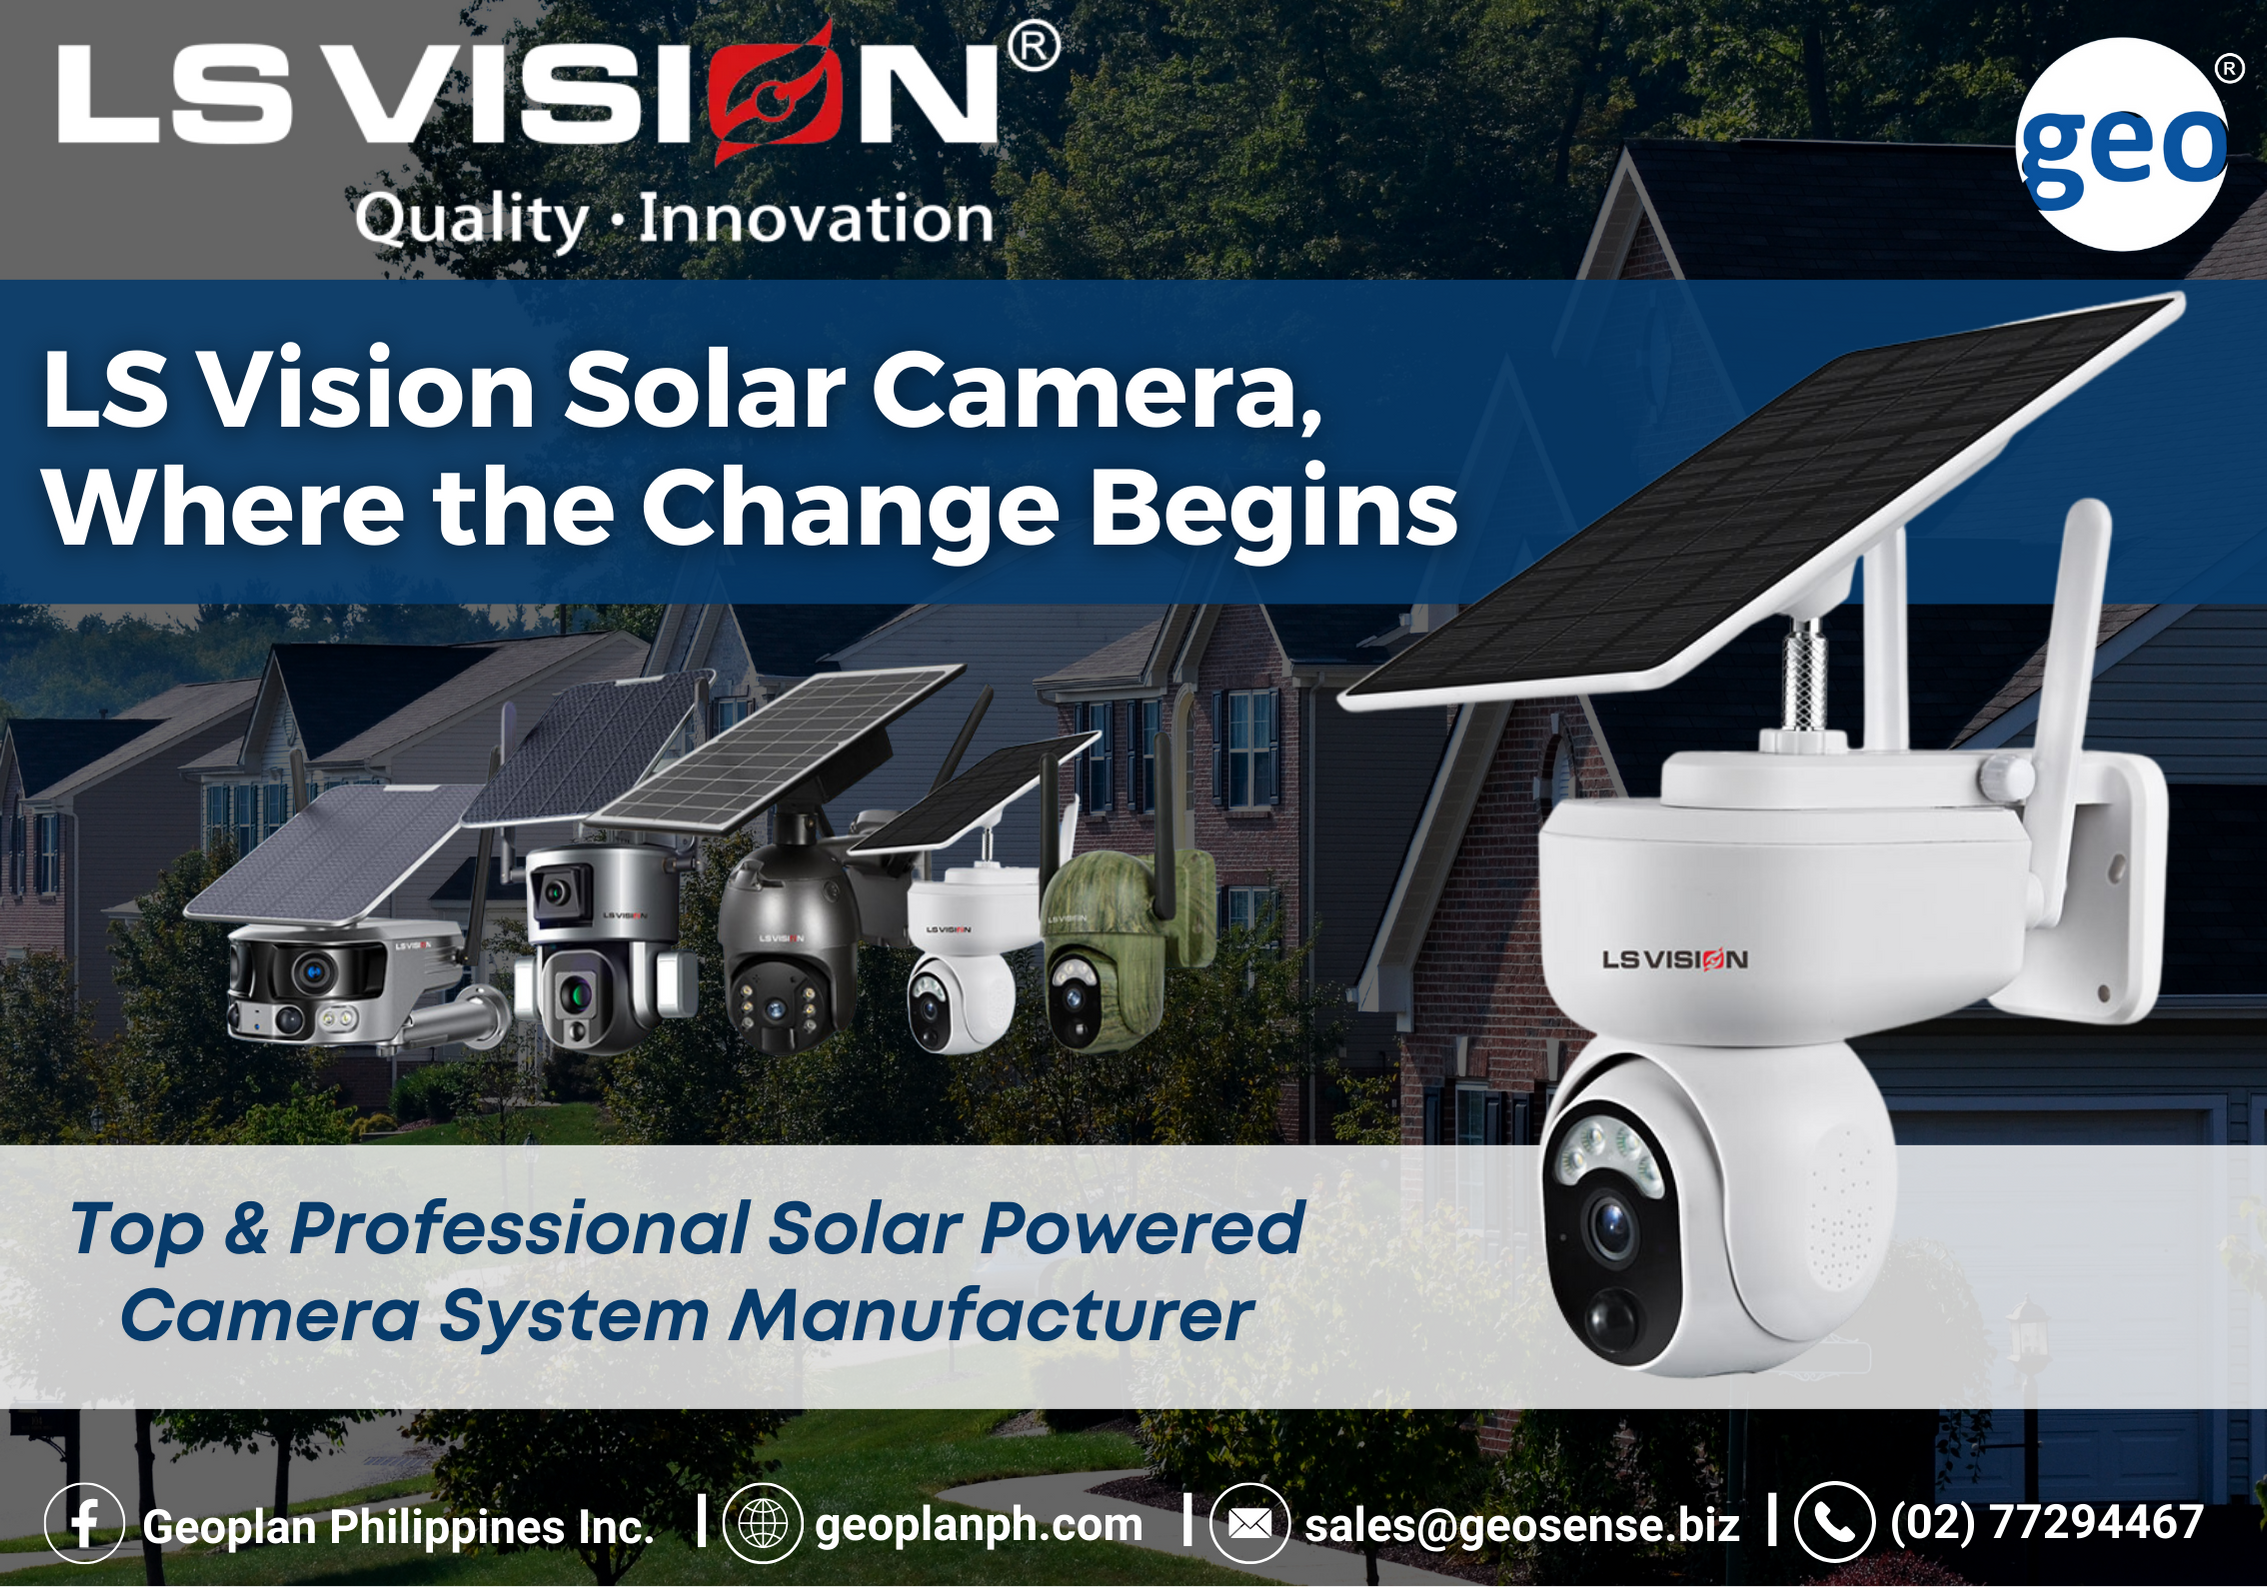 LS Vision: The Innovation Begins with Solar Cameras